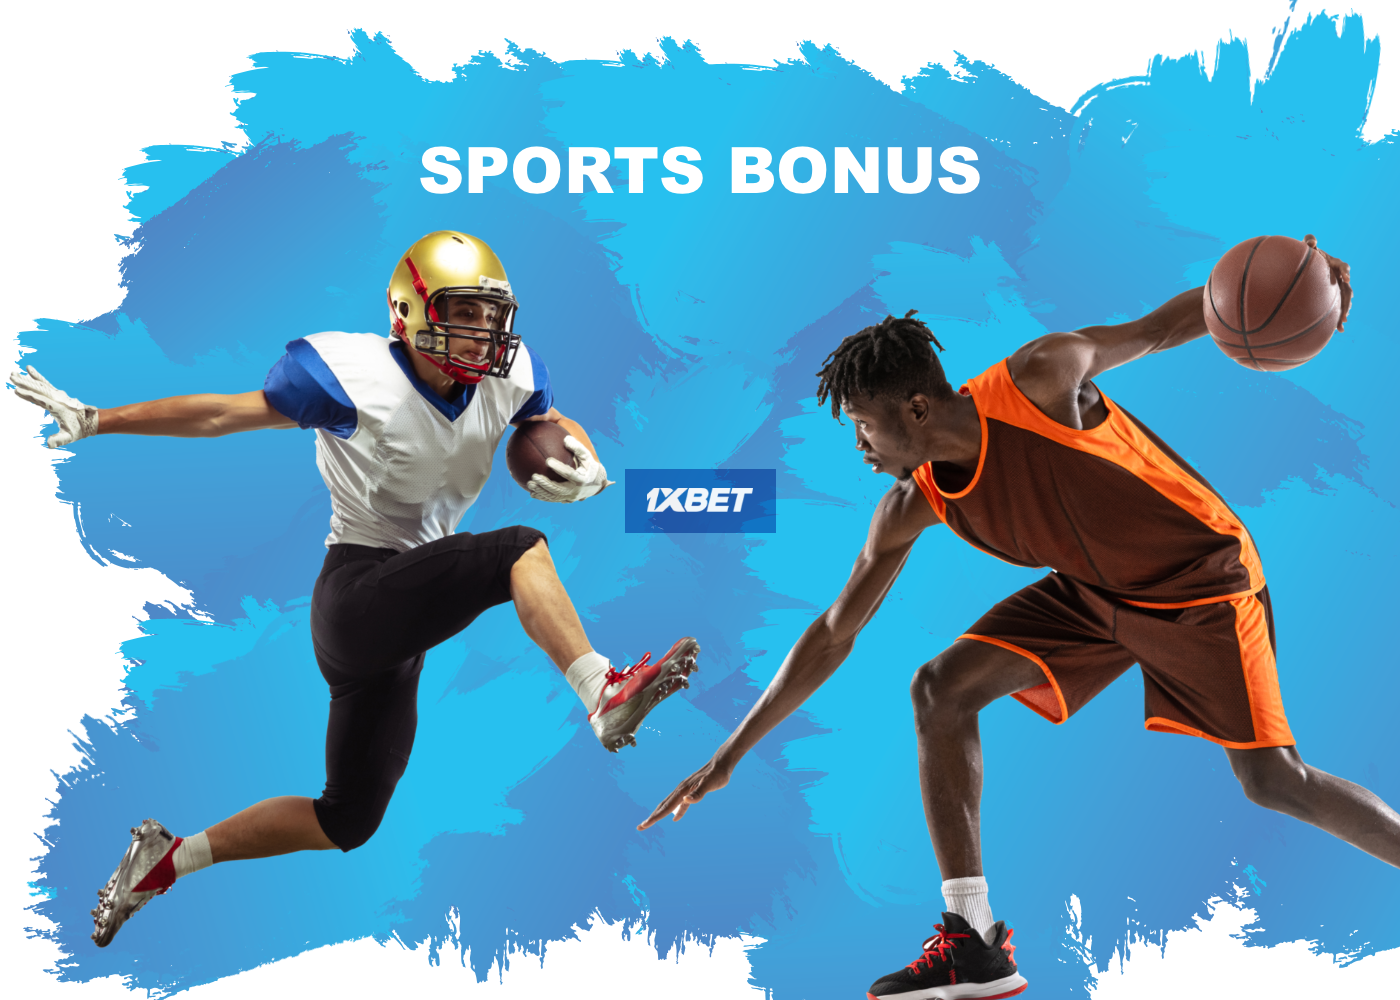 welcome bonus on sports for new 1xbet players